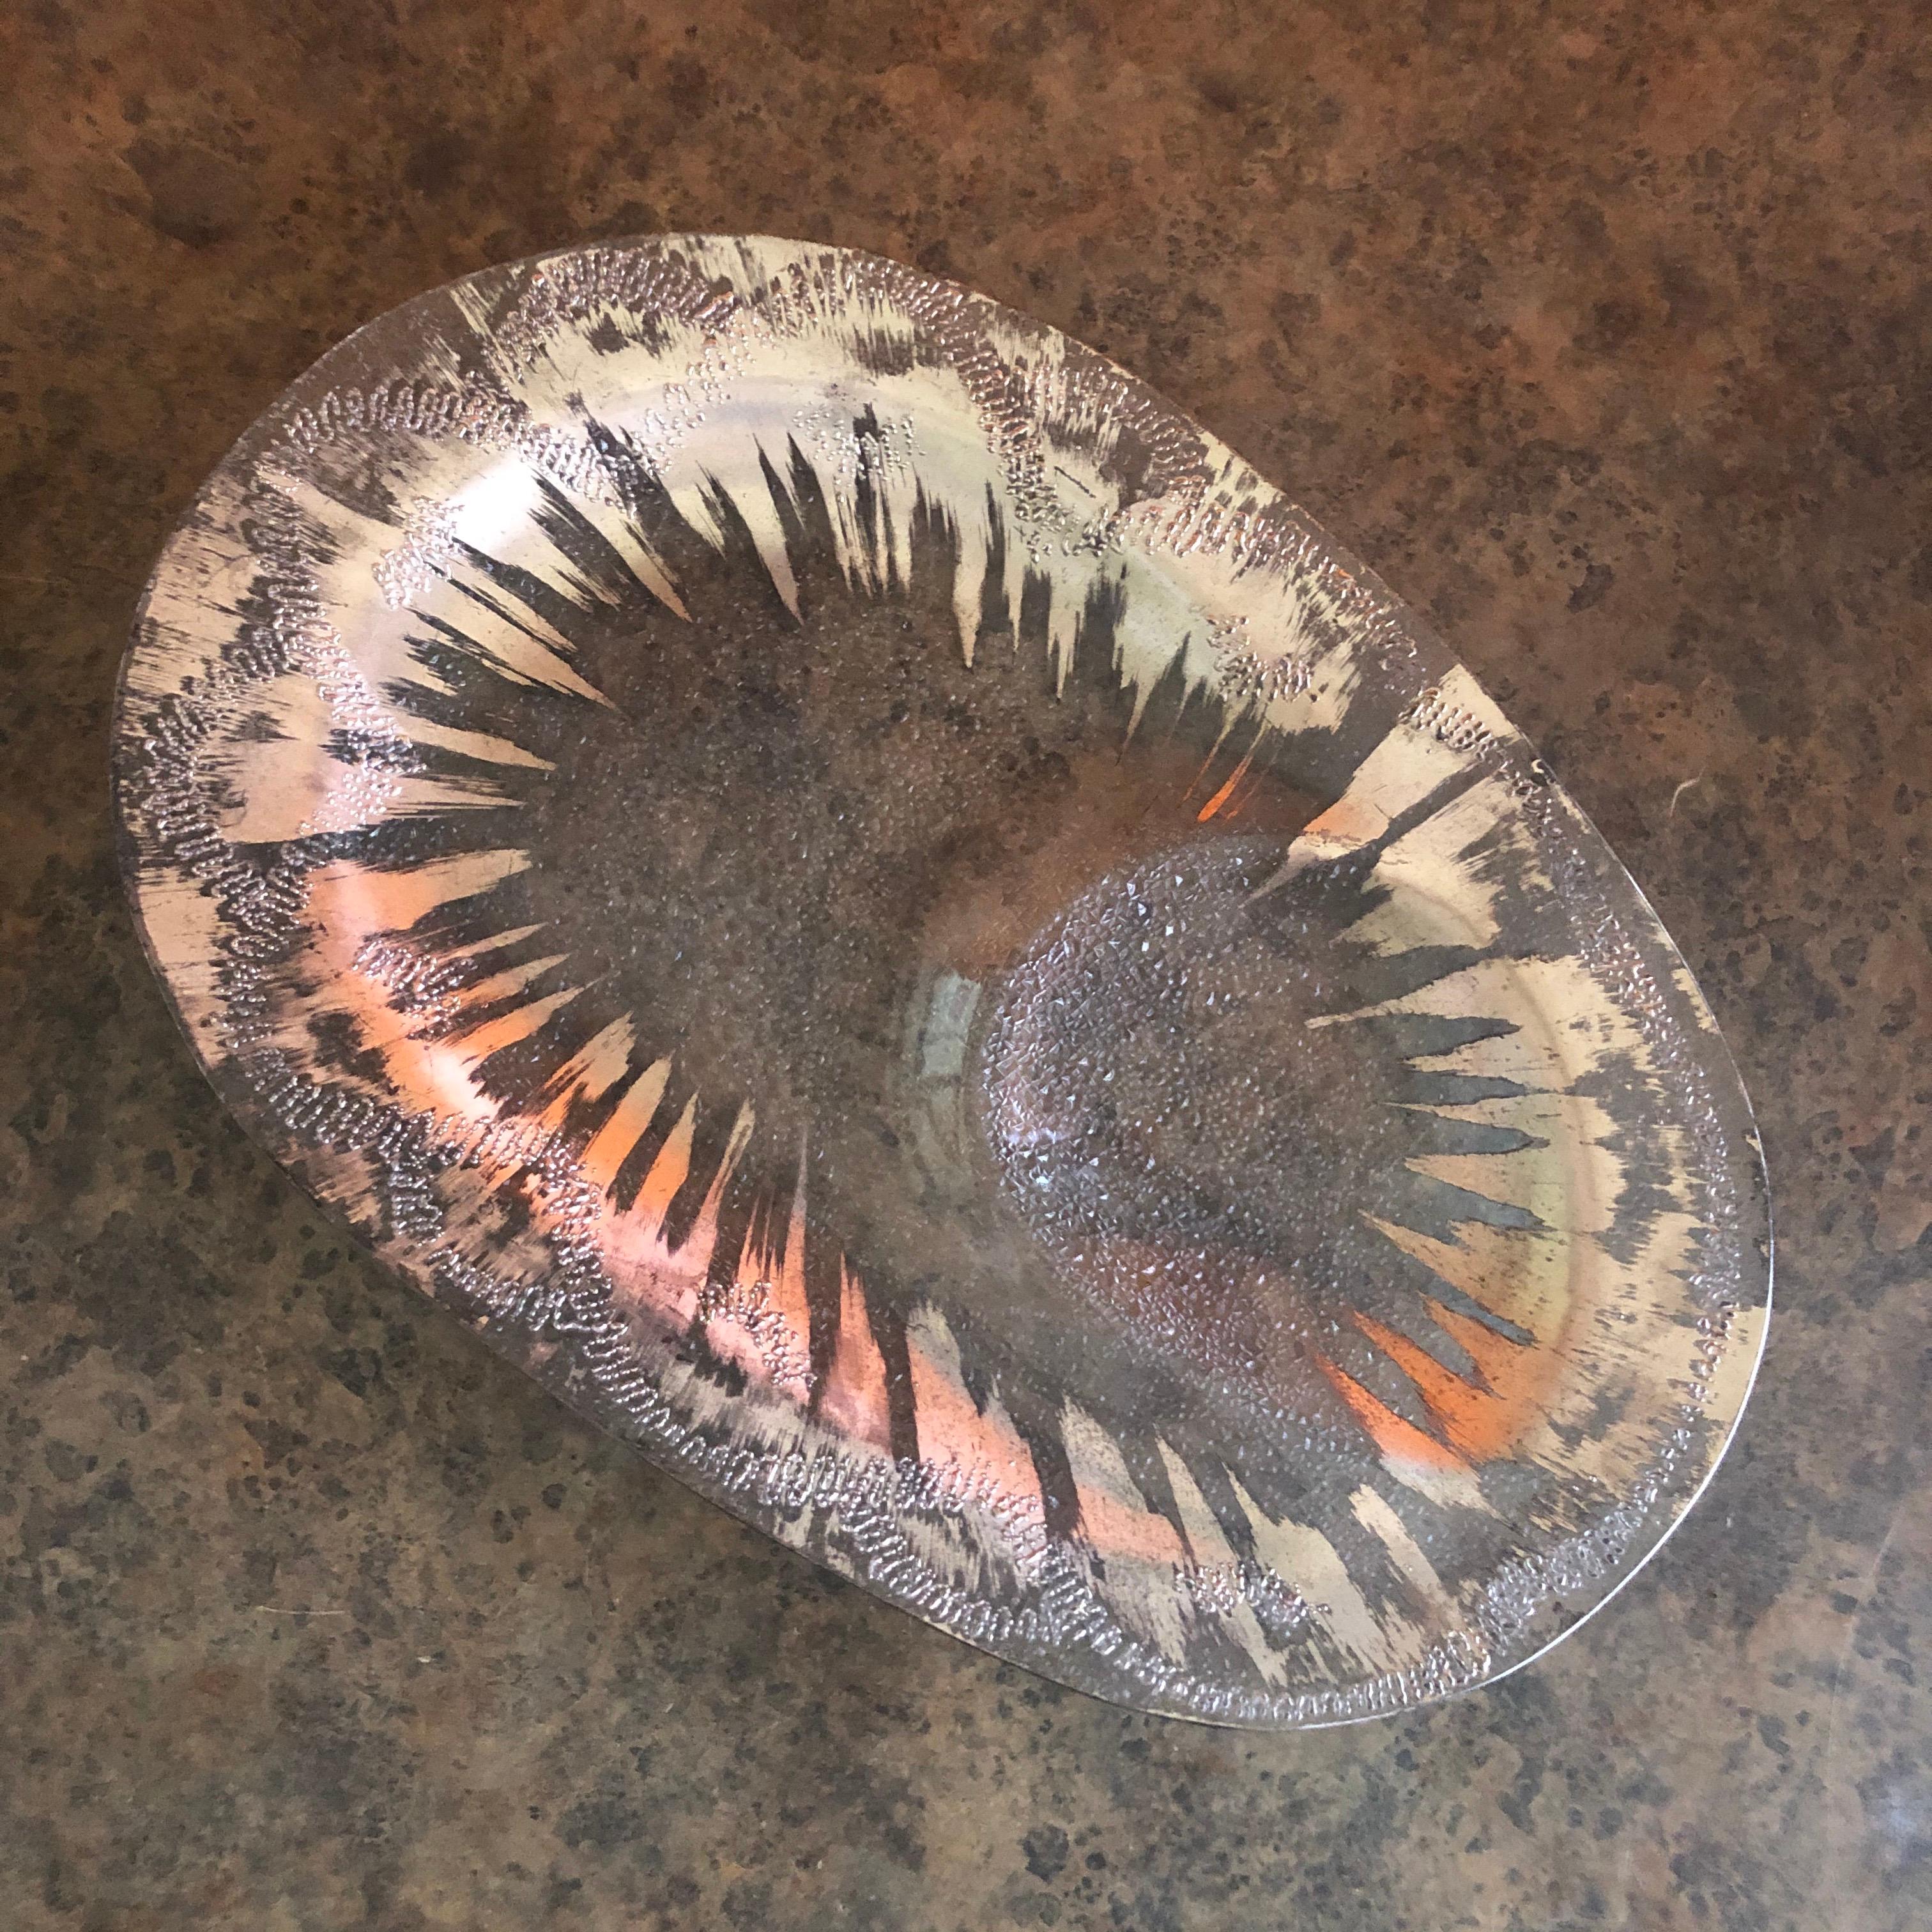 Large midcentury atomic starburst tray by Dorothy Thorpe, circa 1950s. The ruffled glass tray has a gold starburst overlay and is undulated (could be used for dip 7 chips). The piece measures: 18.75